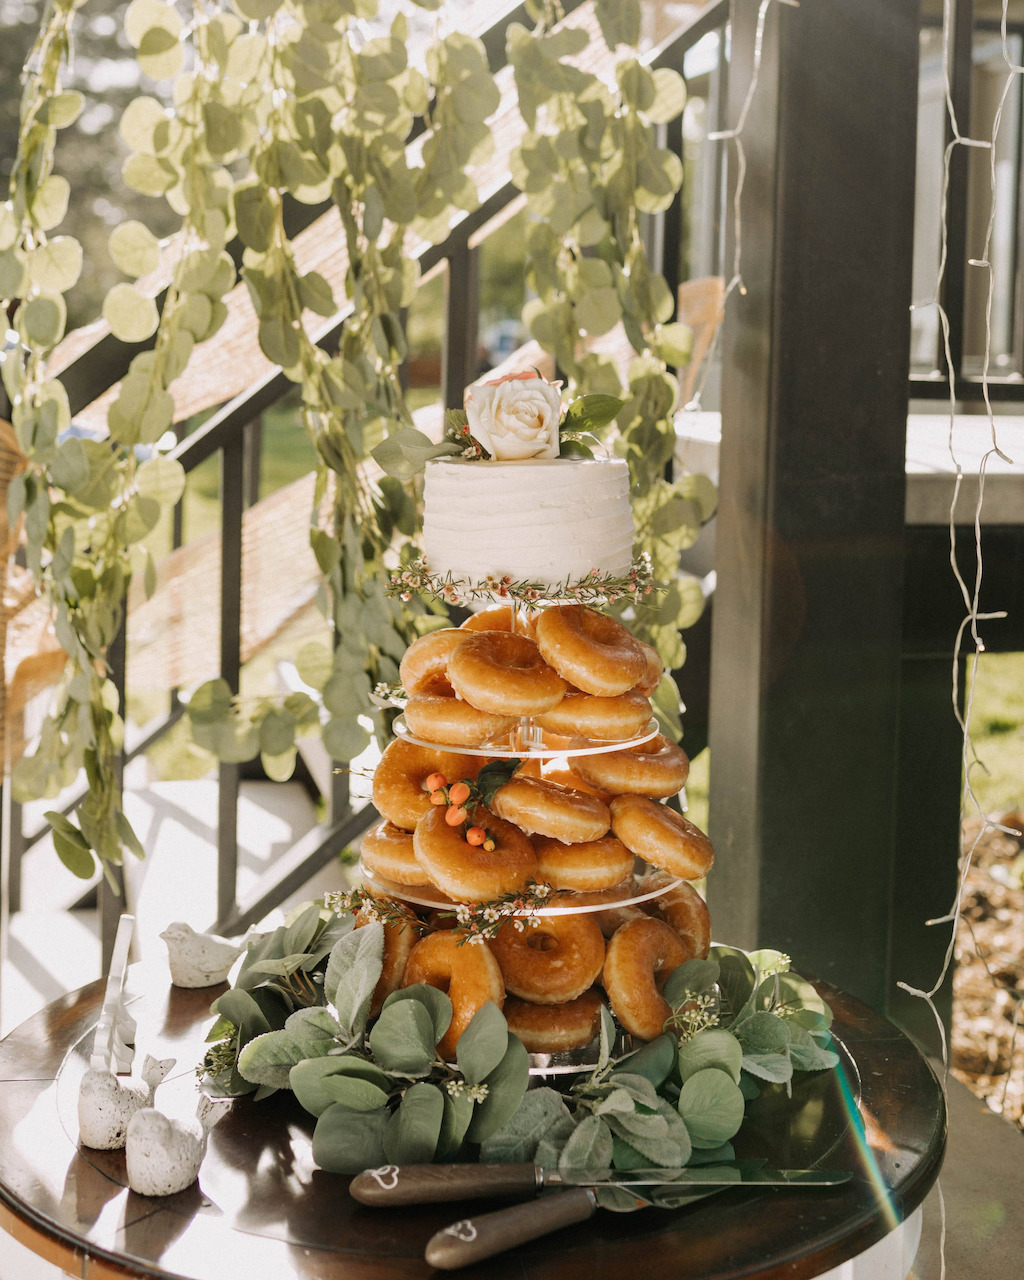 classic rustic wedding cake with donuts